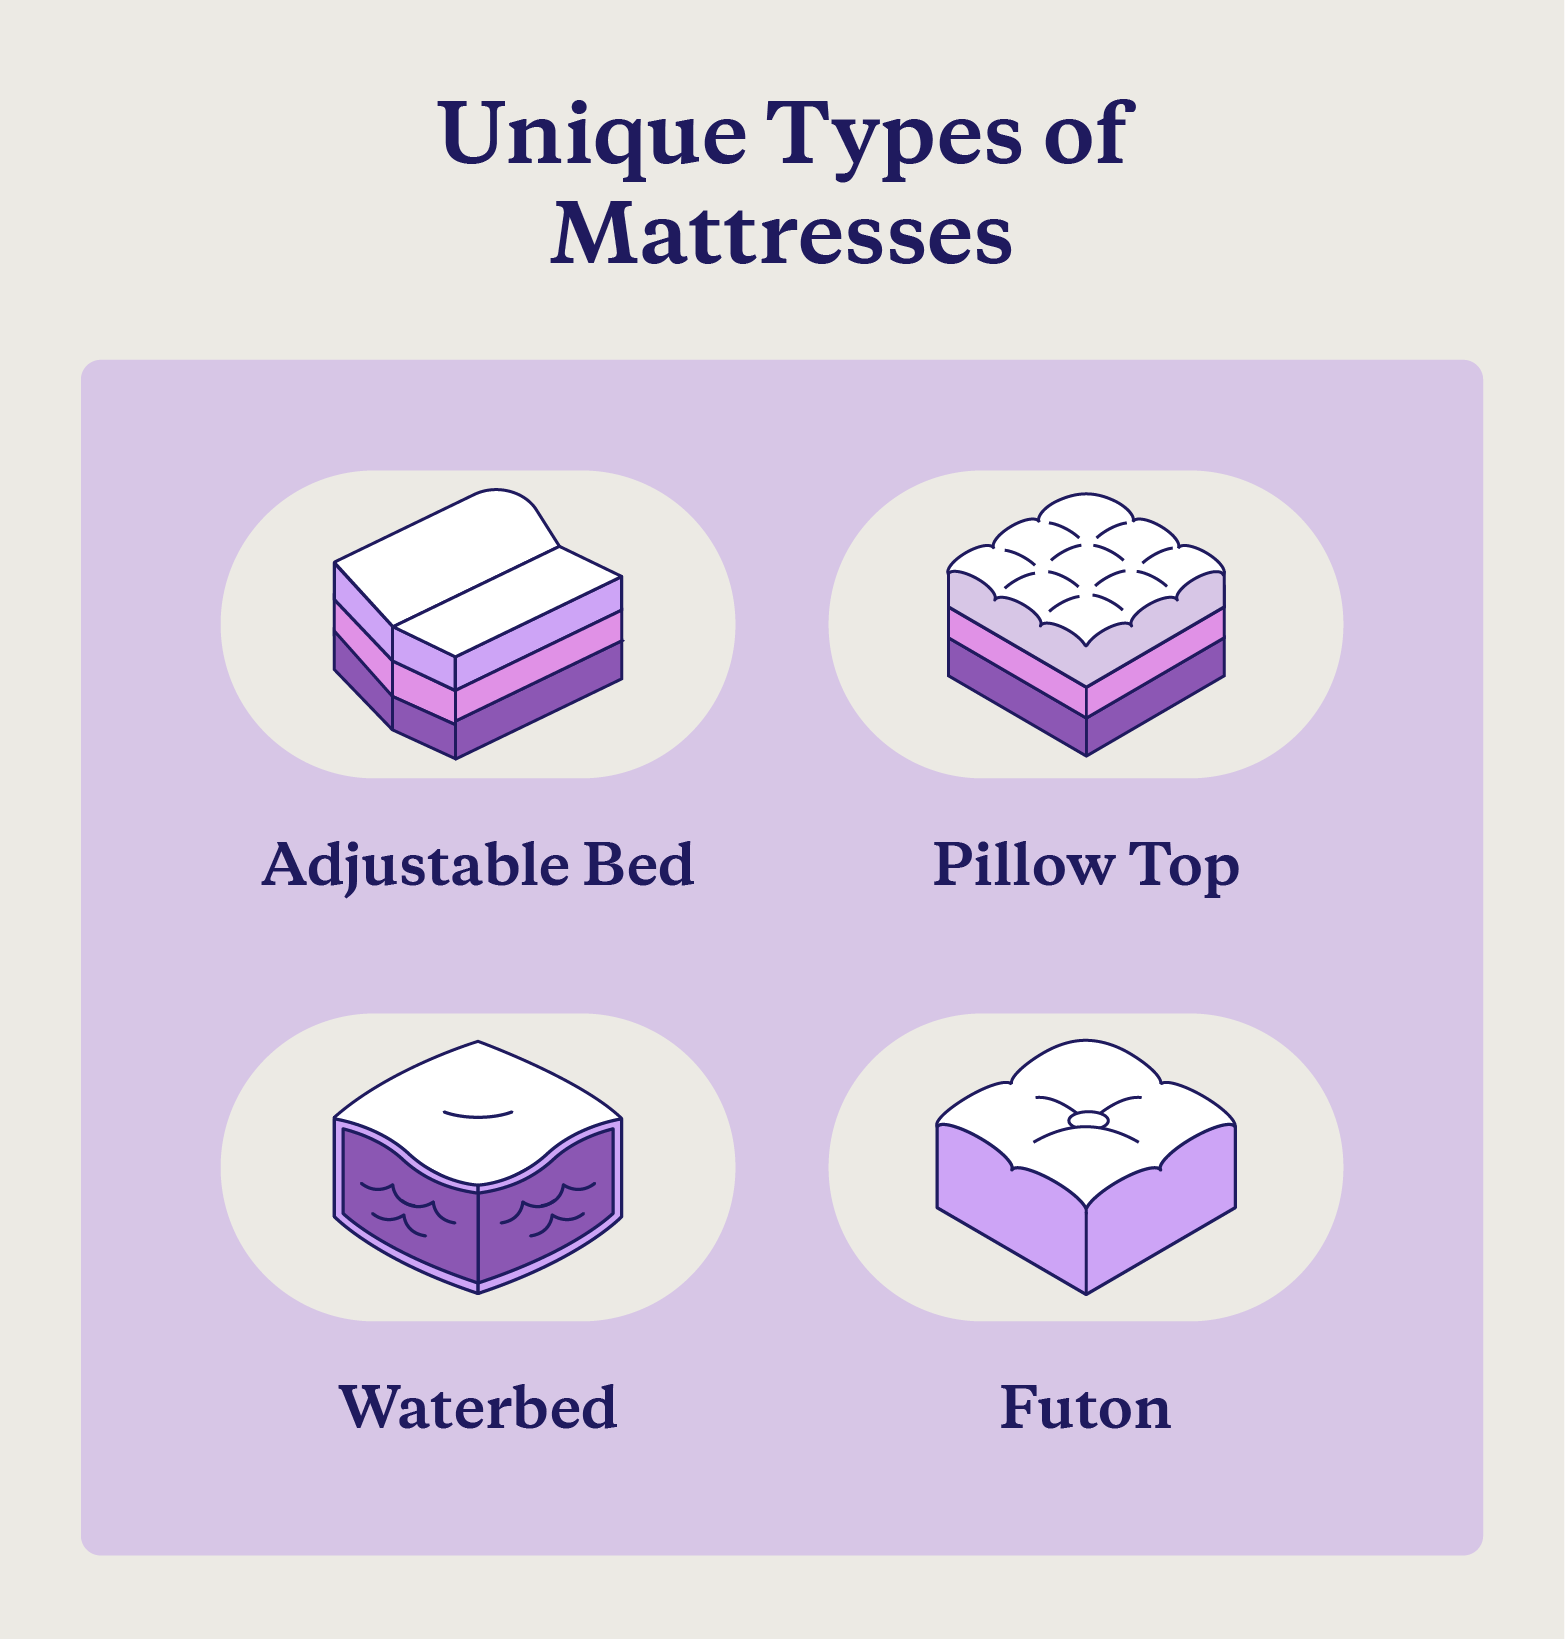 Four types of alternative mattress types, including adjustable beds, pillow tops, waterbeds, and futons